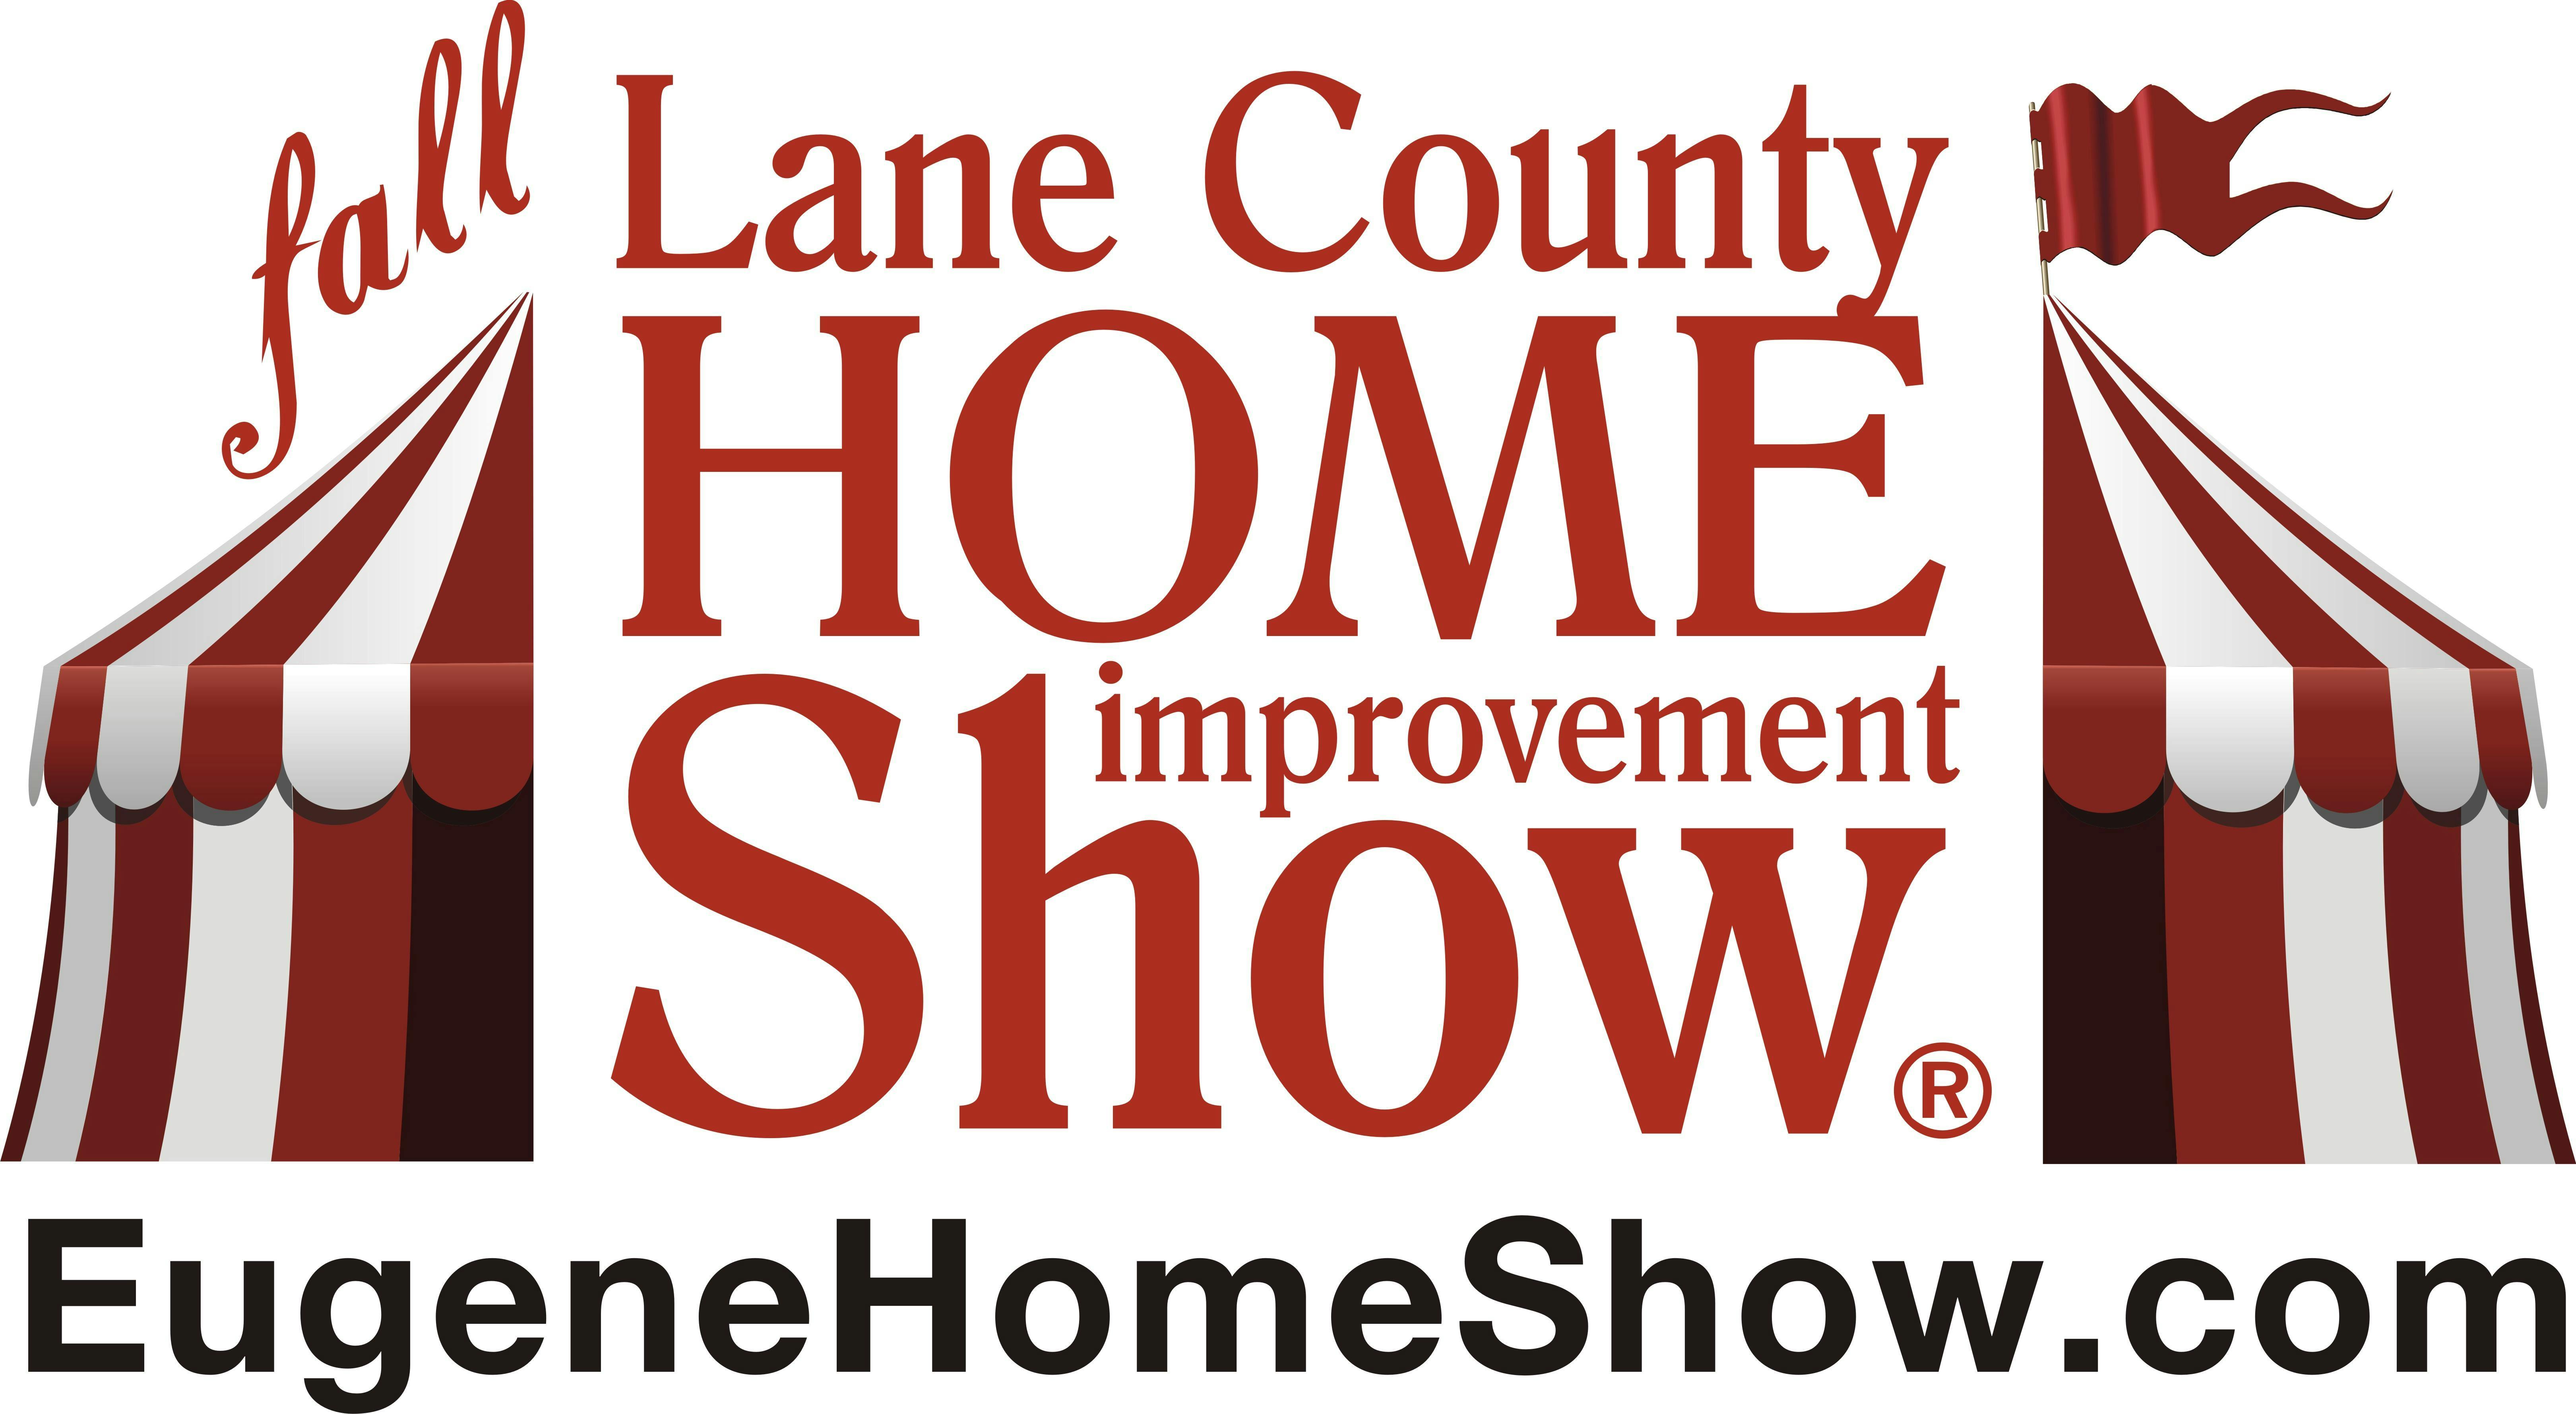 37th Lane County Home Improvement Show